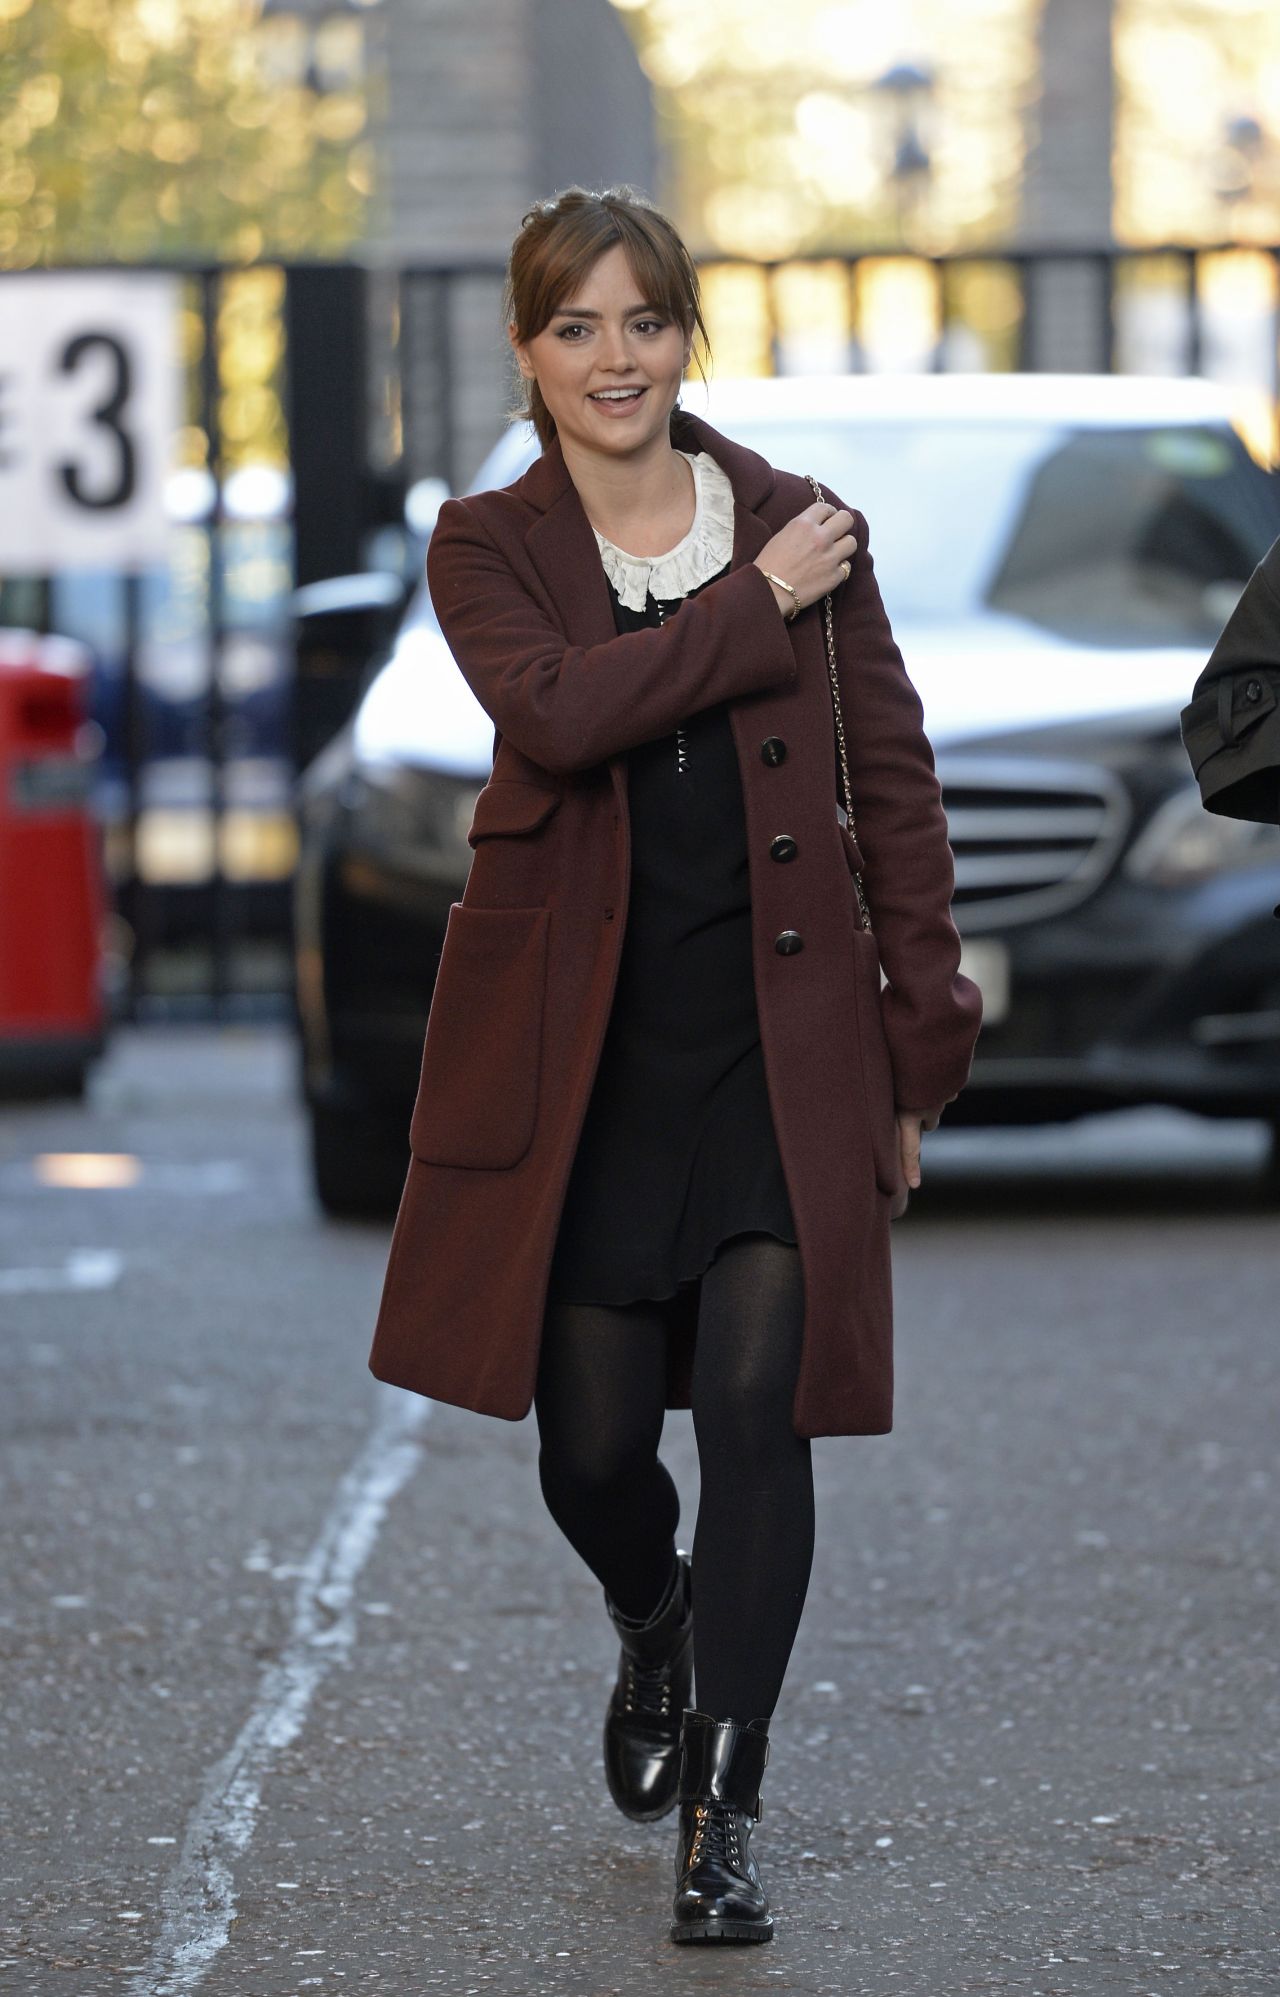 Jenna Coleman Style, Clothes, Outfits and Fashion• Page 23 of 23 ...